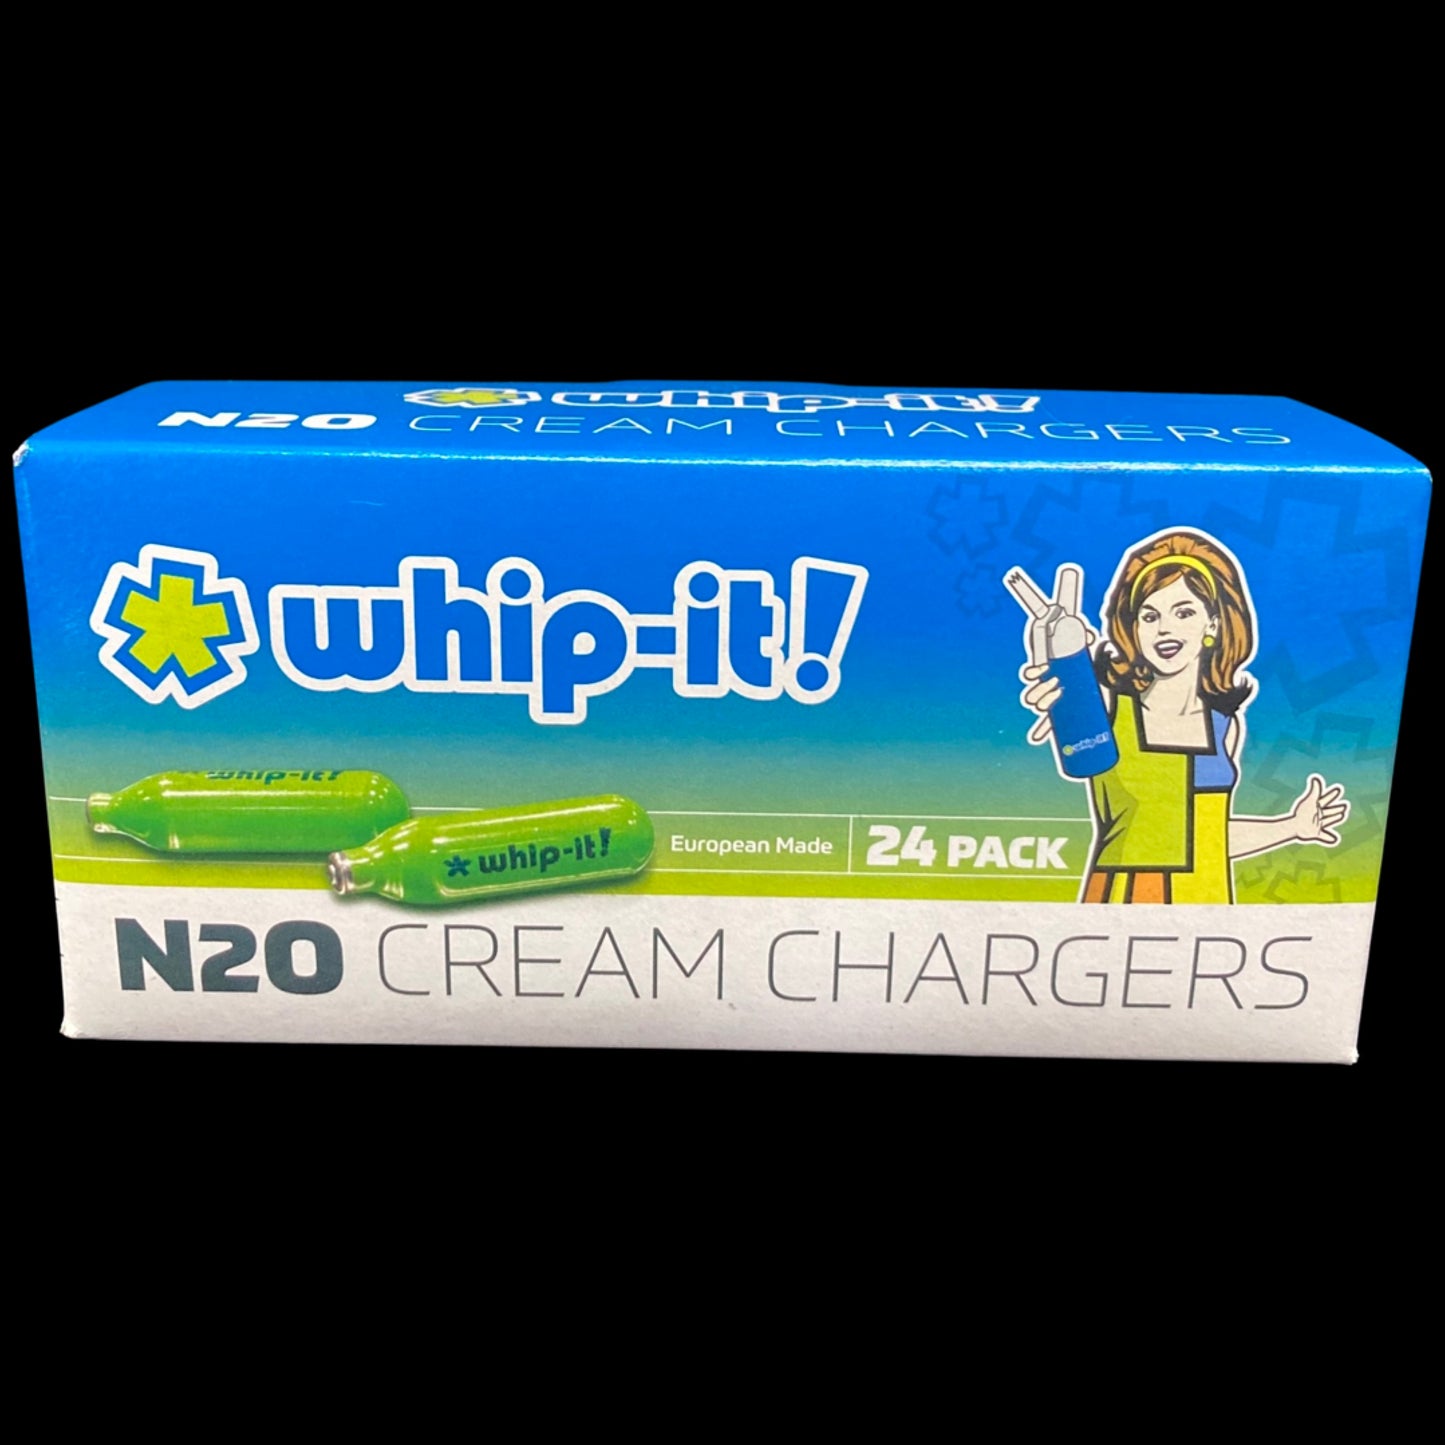 Whip It Cream chargers 24count